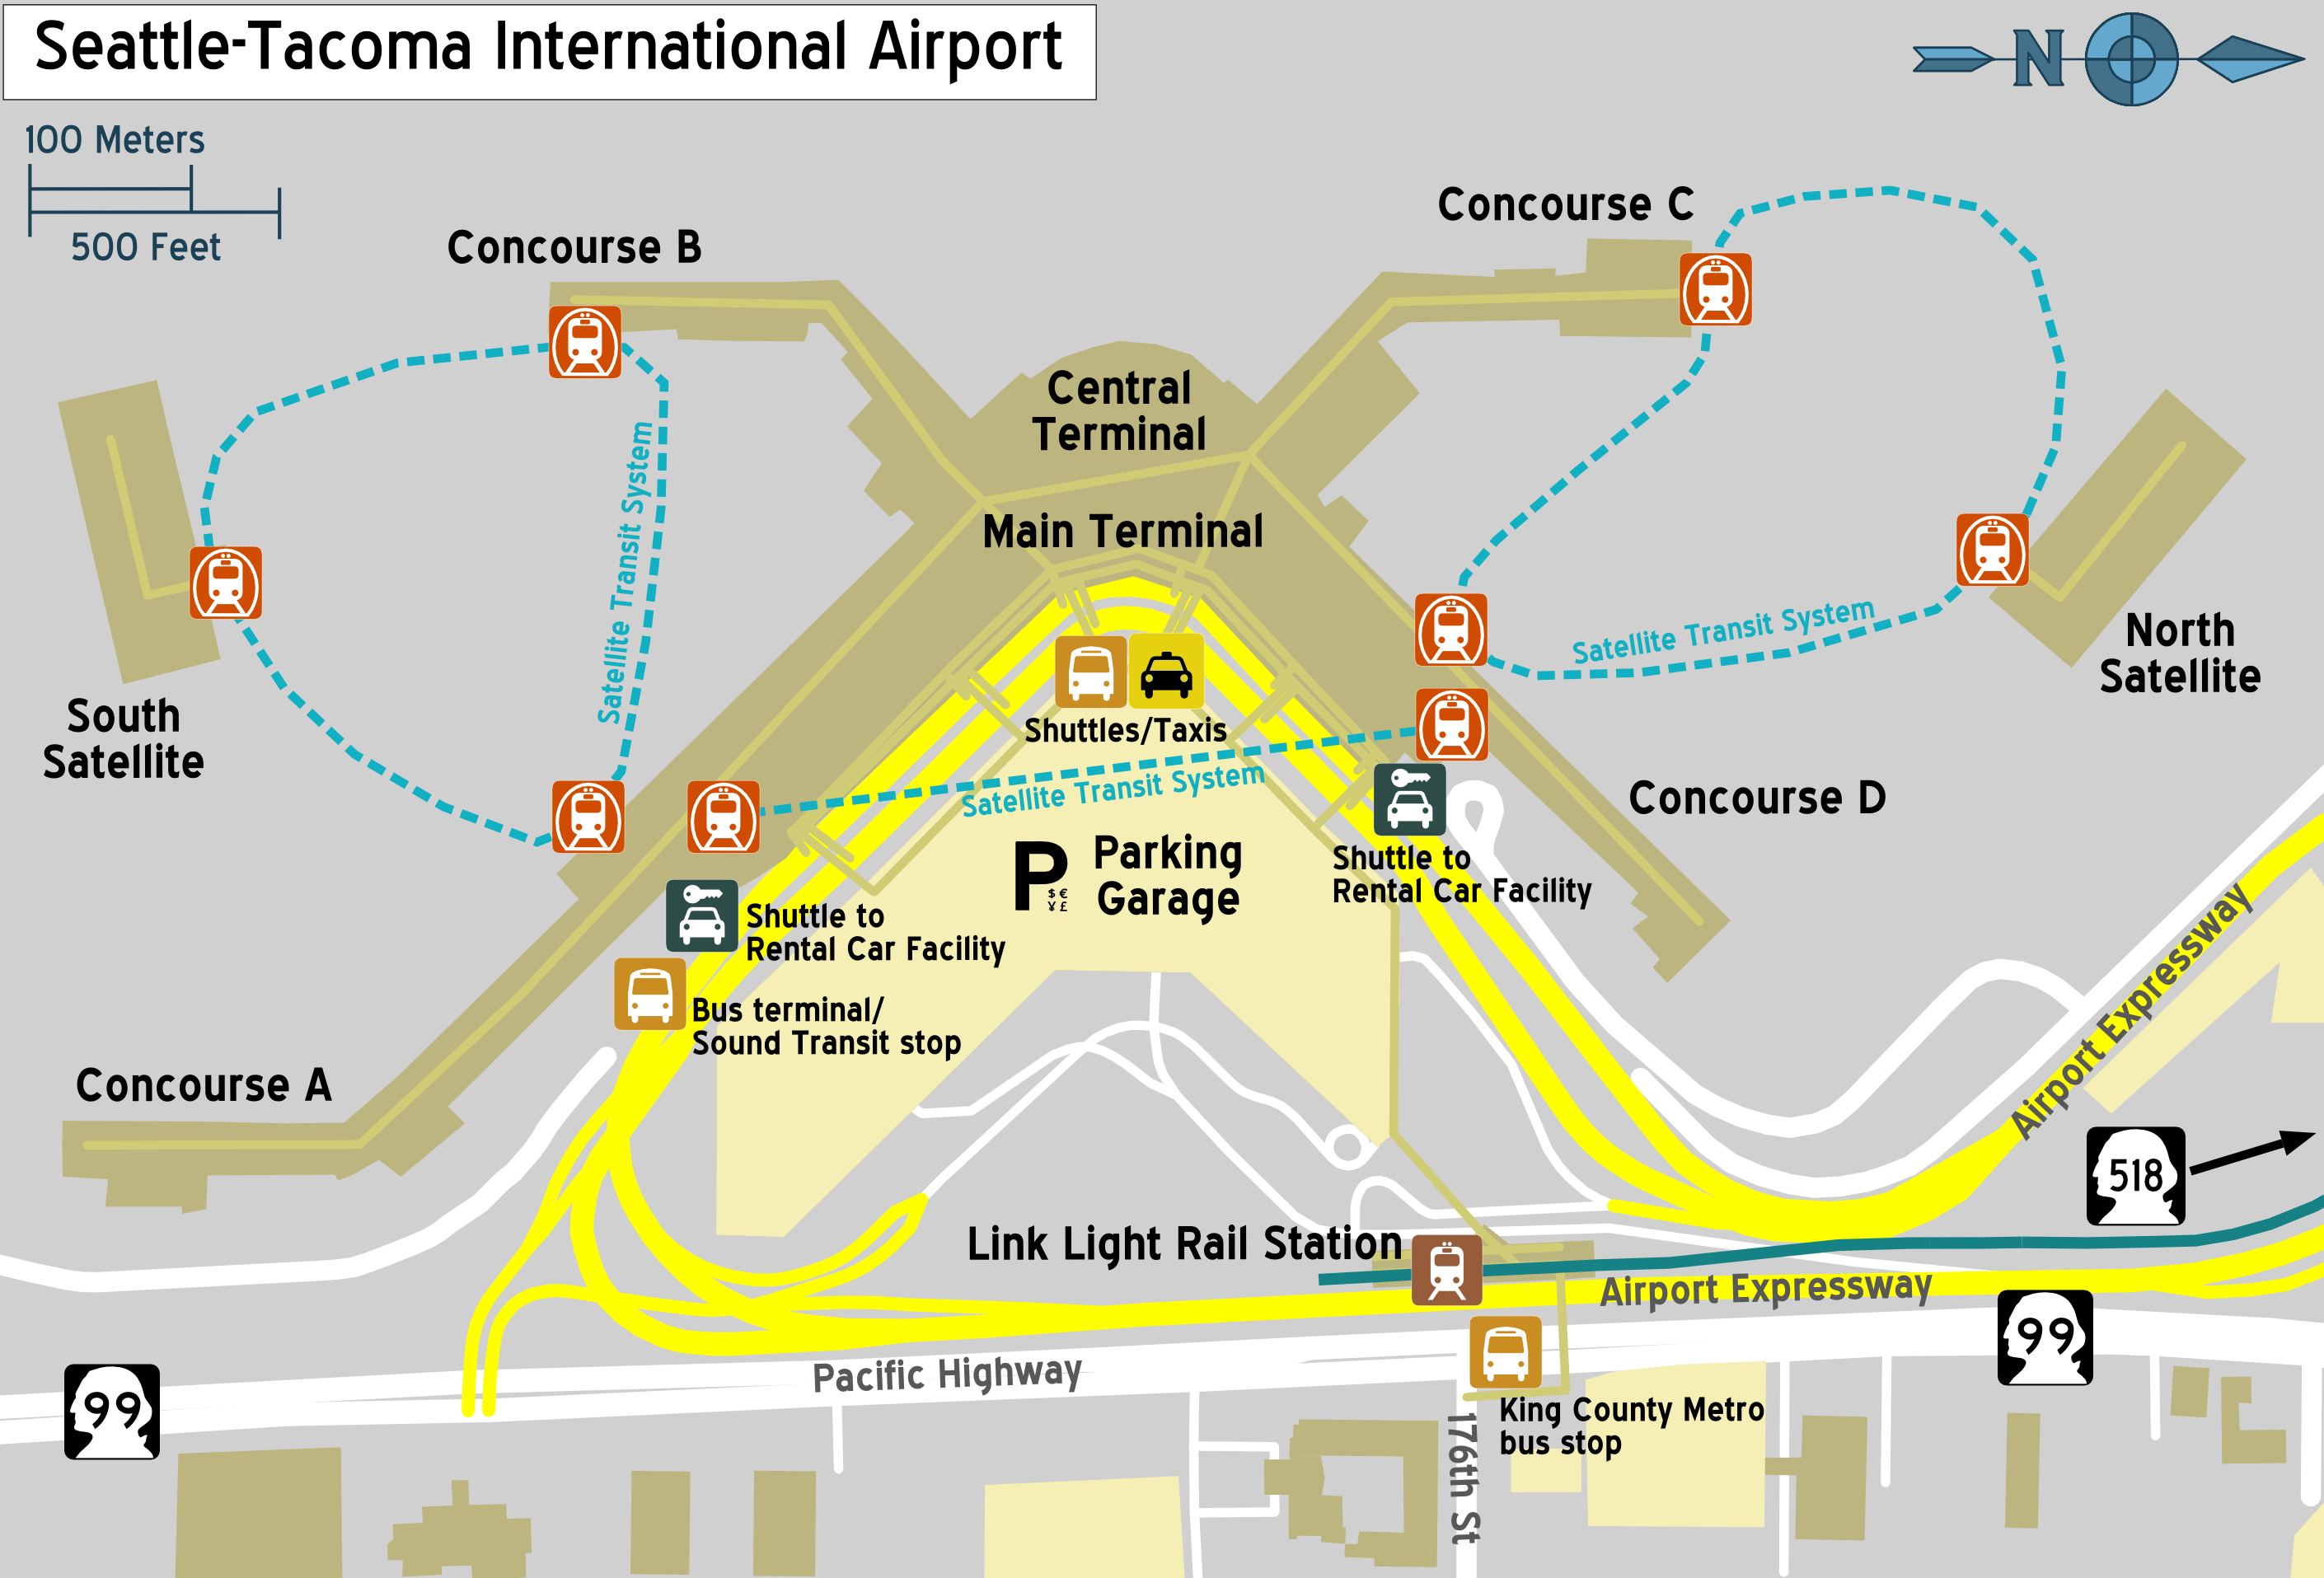 Map of the Seattle-Tacoma International Airport terminal, showing taxi service in the parking garage